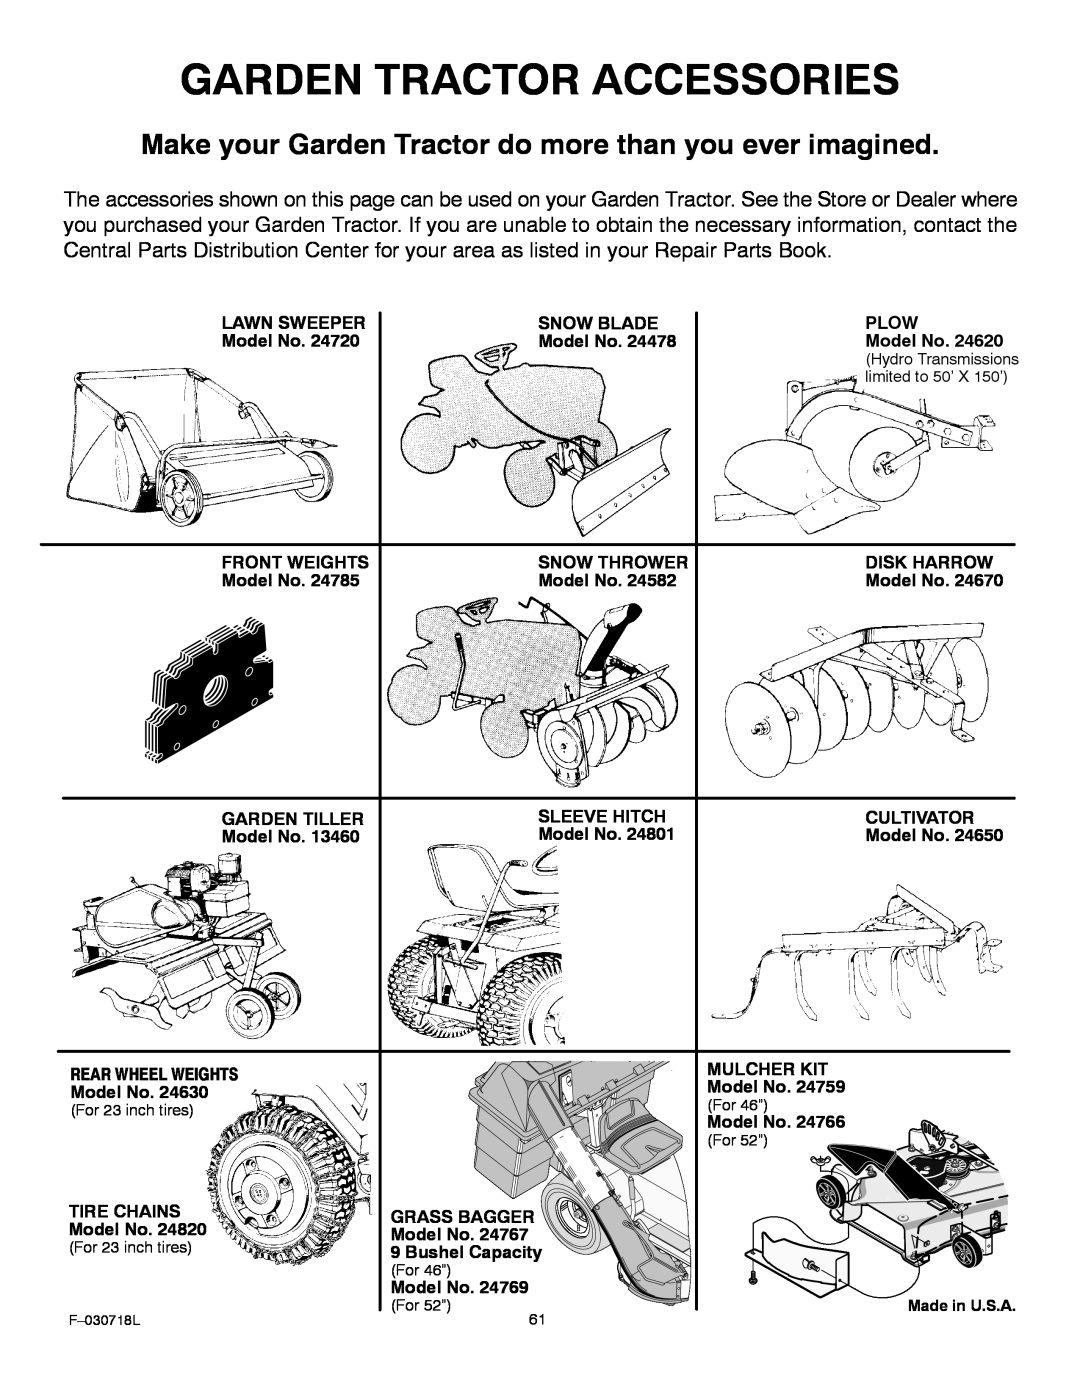 Murray 461000x8A manual Garden Tractor Accessories, Make your Garden Tractor do more than you ever imagined 